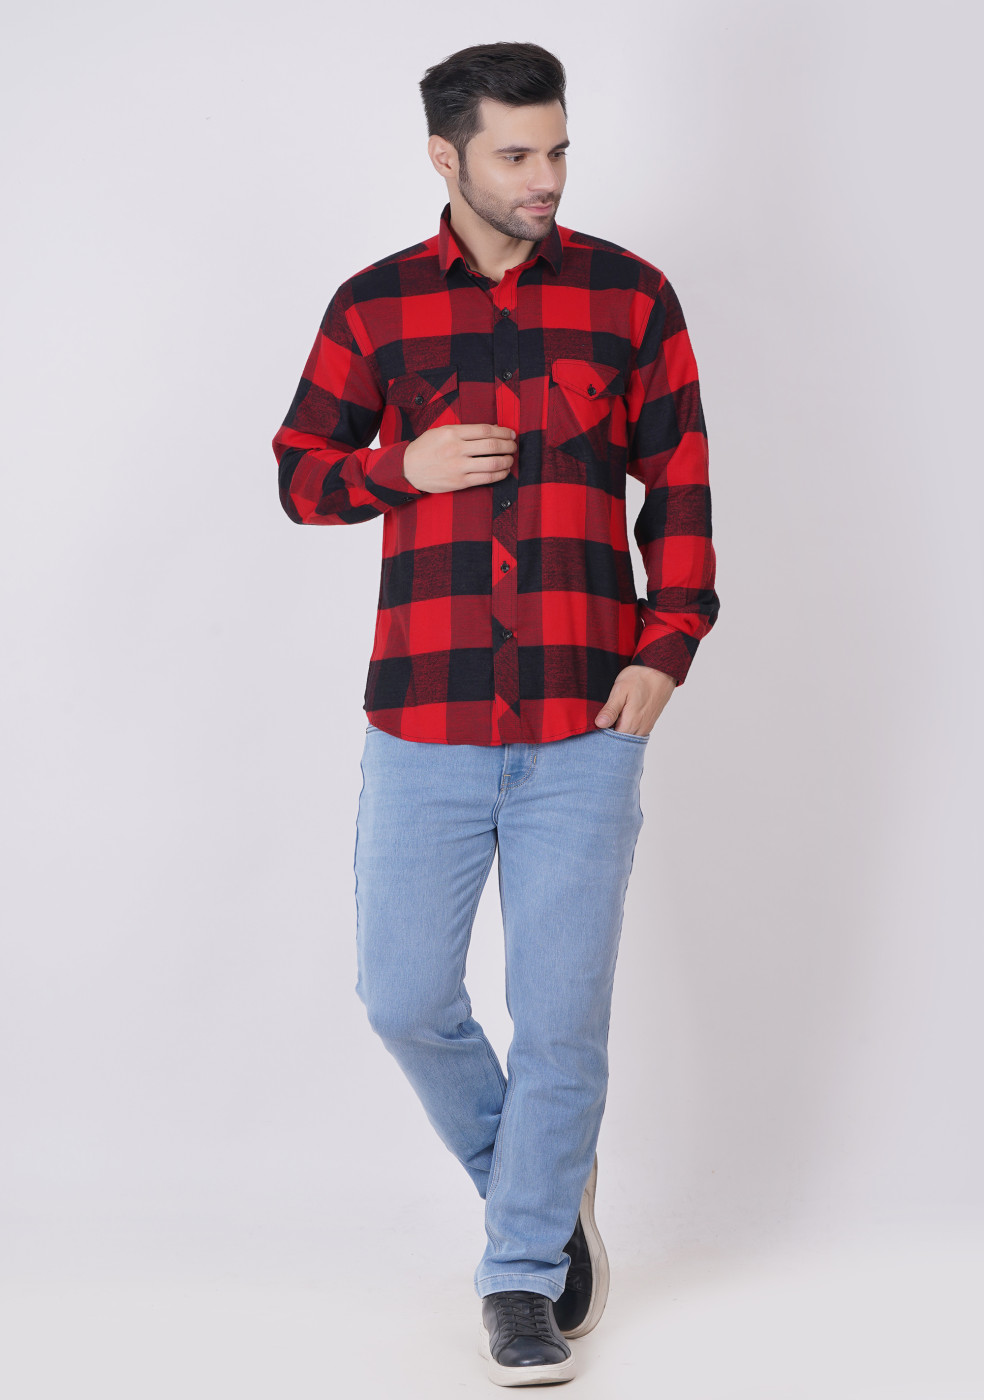 Men's Casual Shirt for Winter